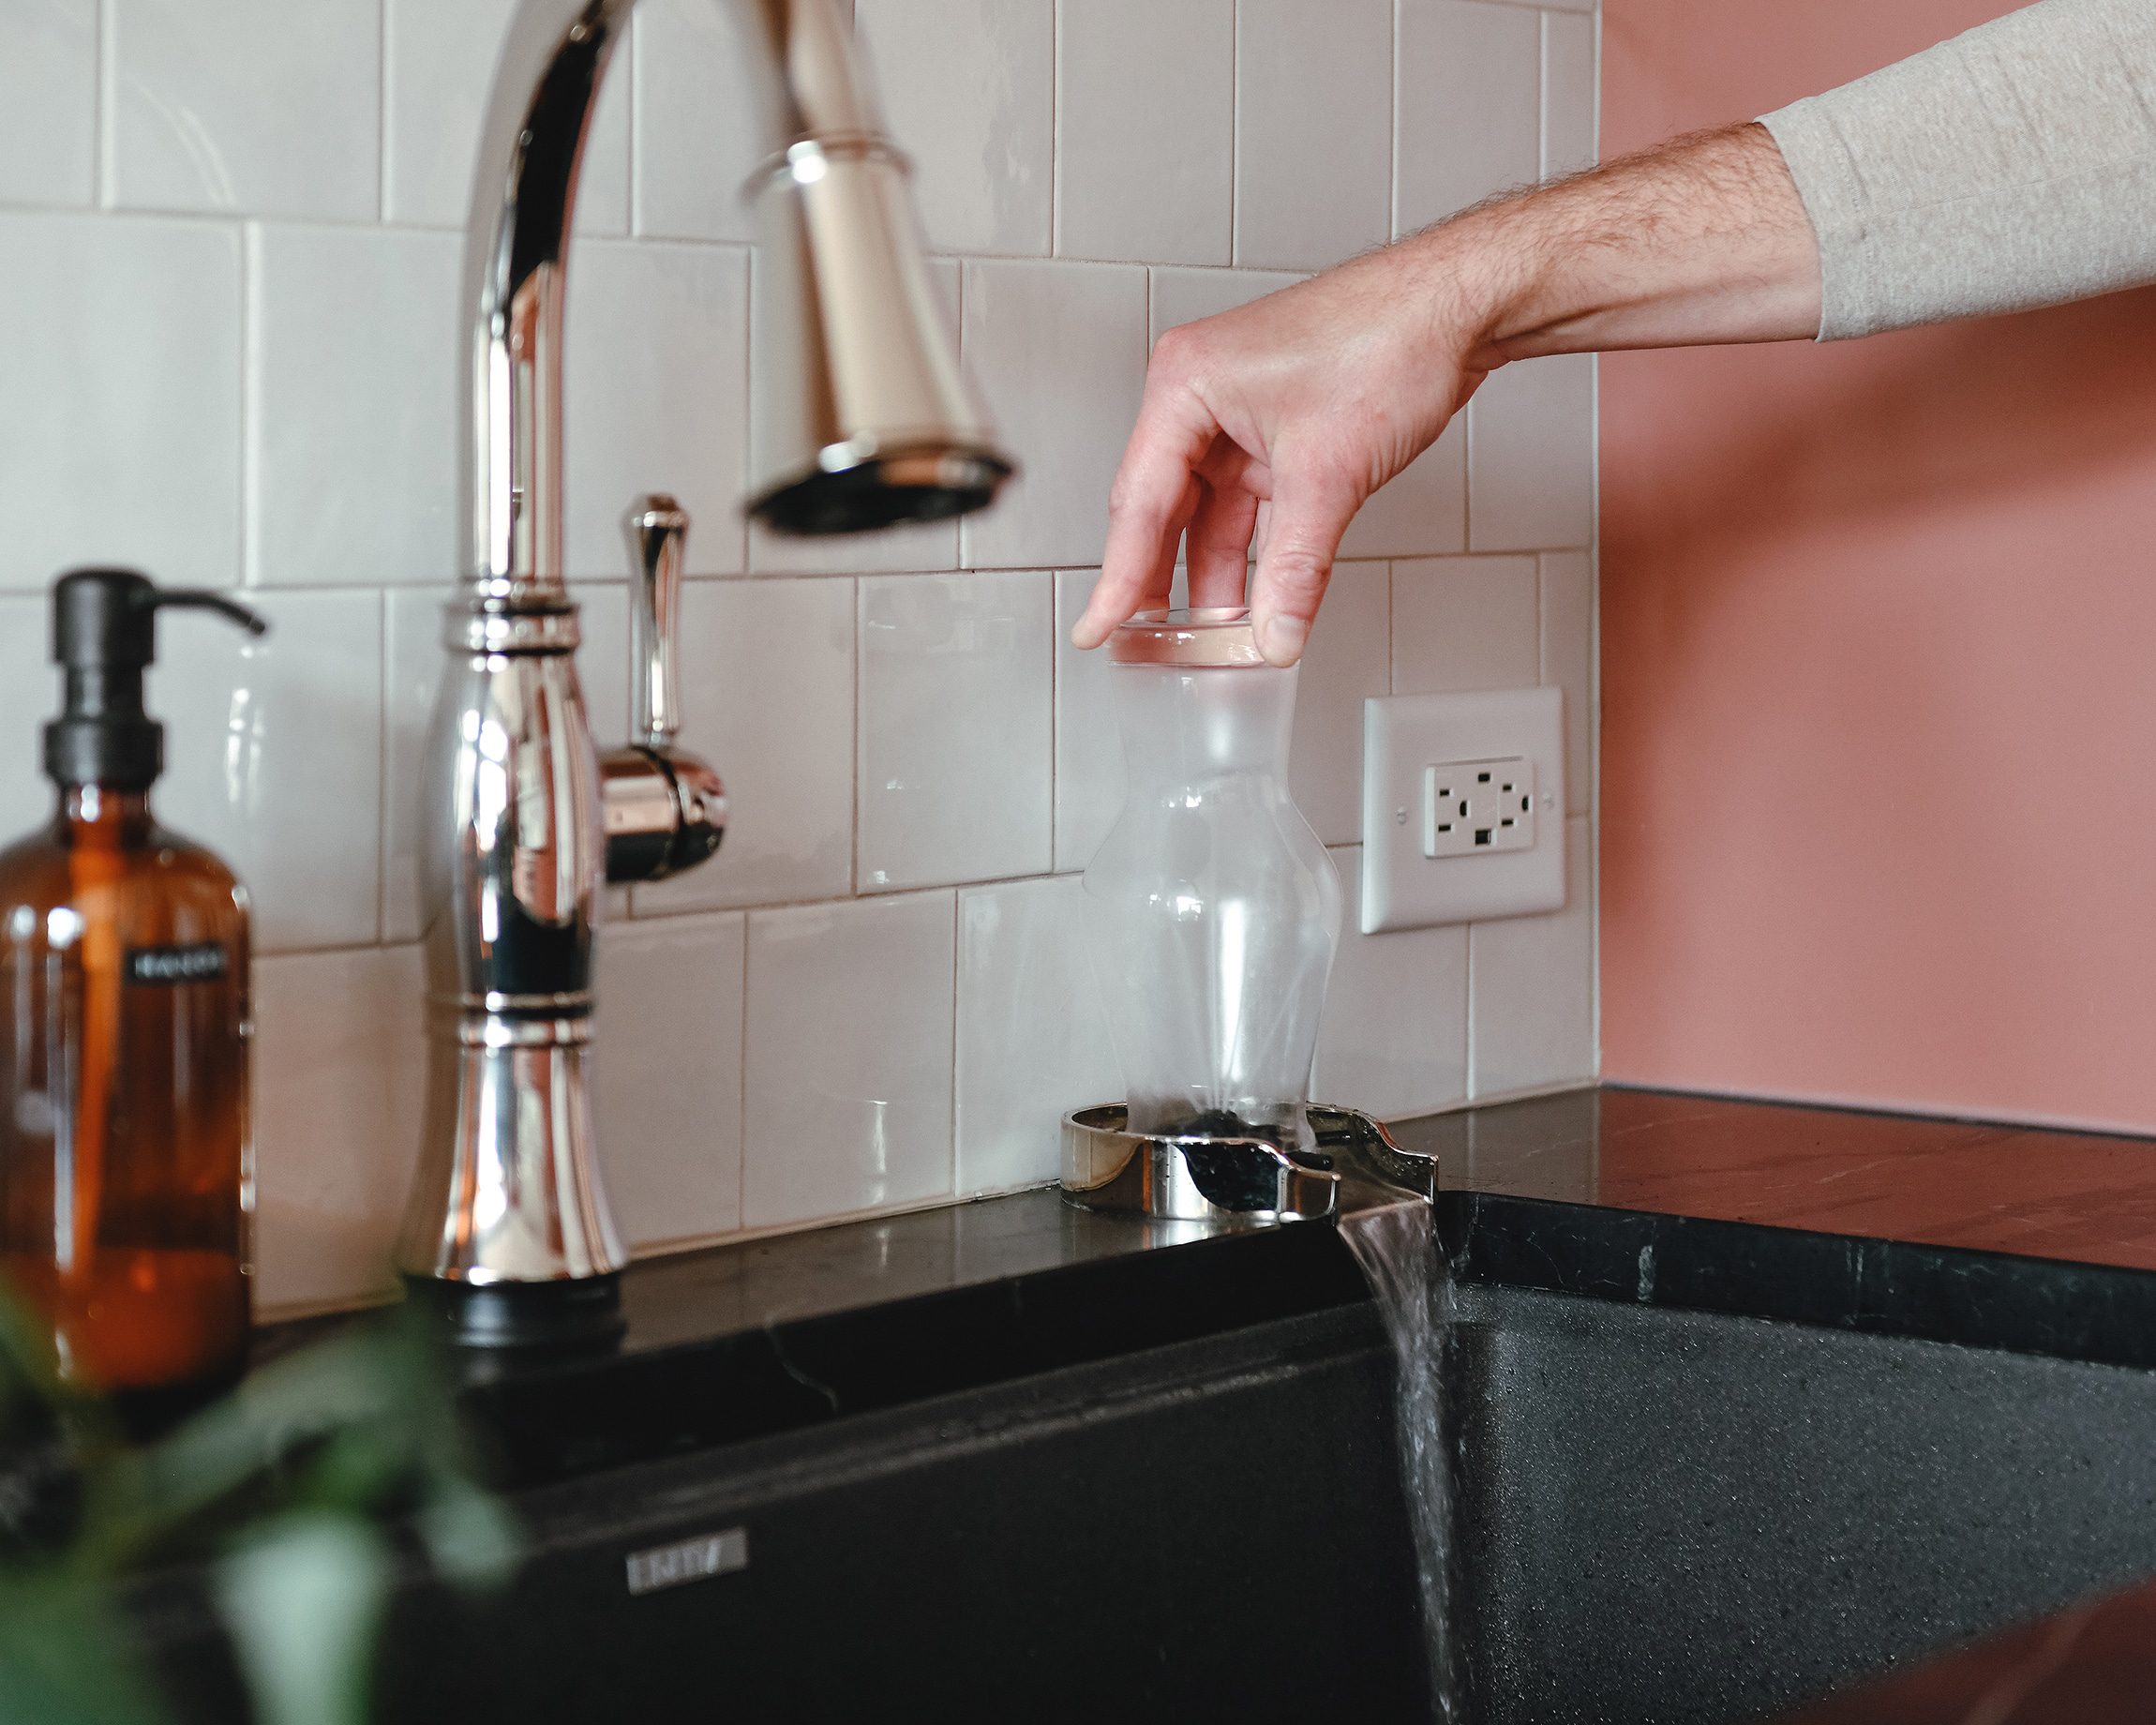 Scott rinses a specialty beer glass on our Delta glass rinser // via Yellow Brick Home